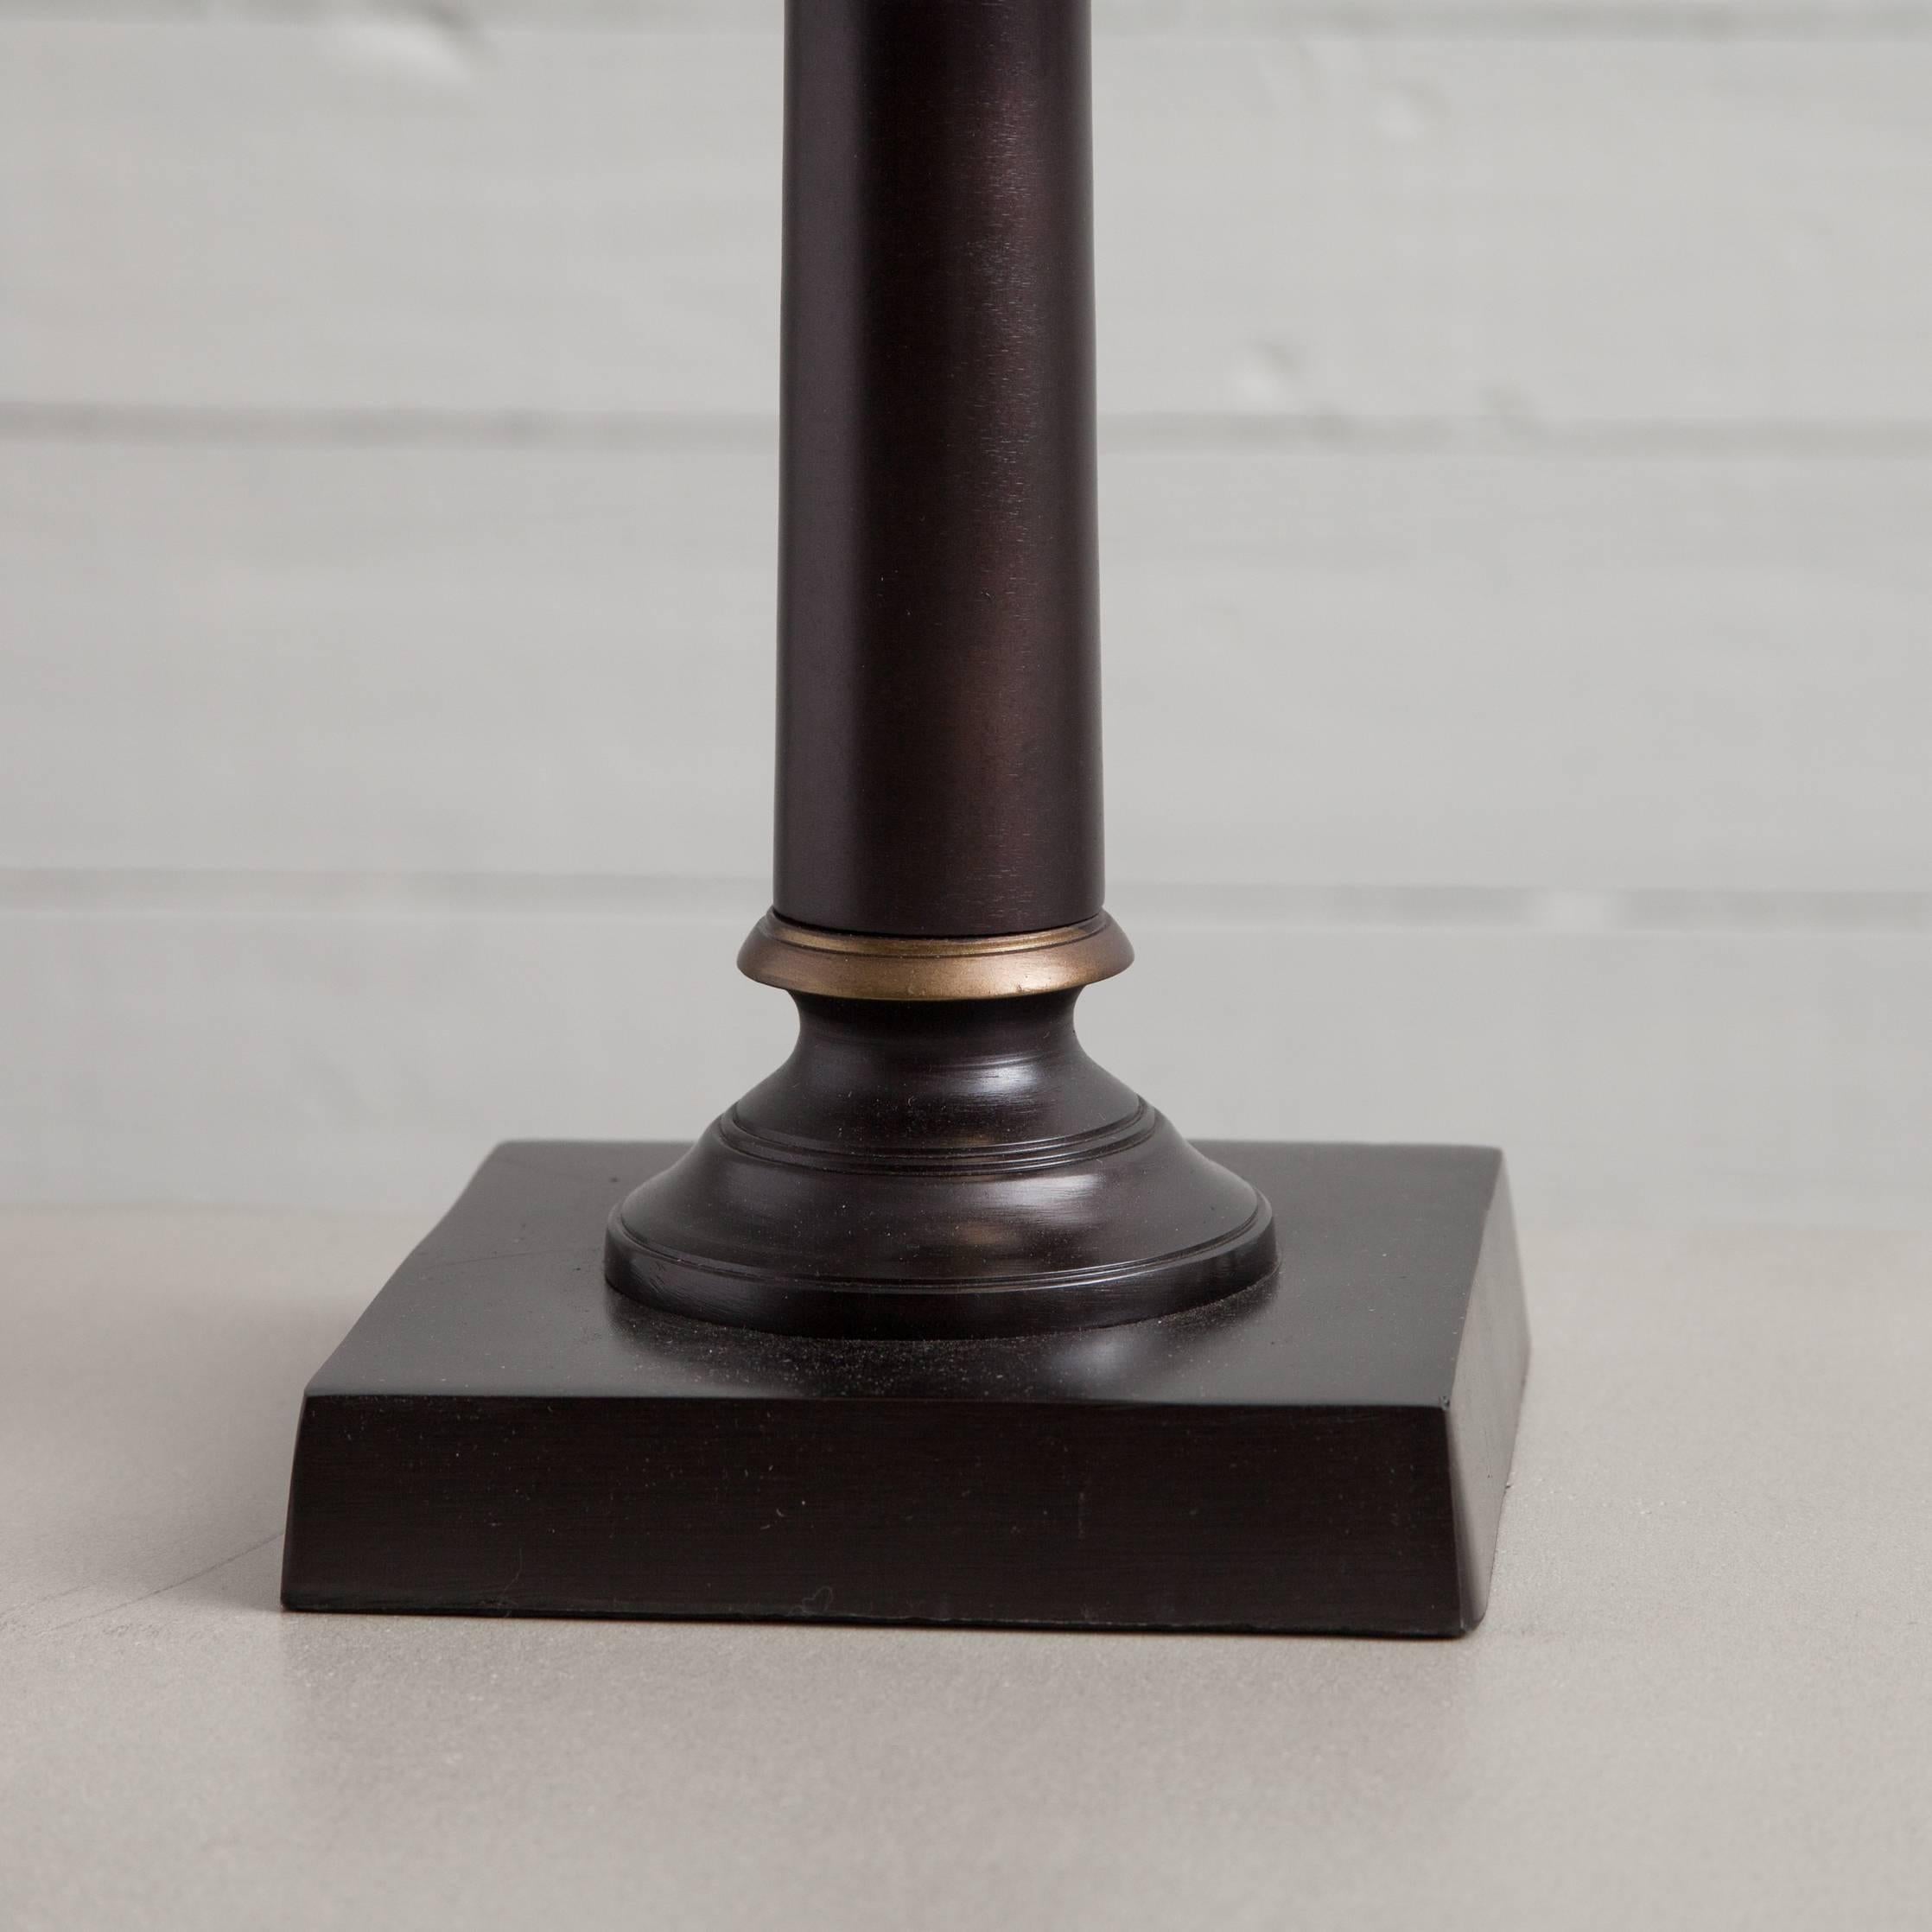 Dramatic black table lamp in oil rubbed bronze with black card shade and golden details.

Dimensions: W 14